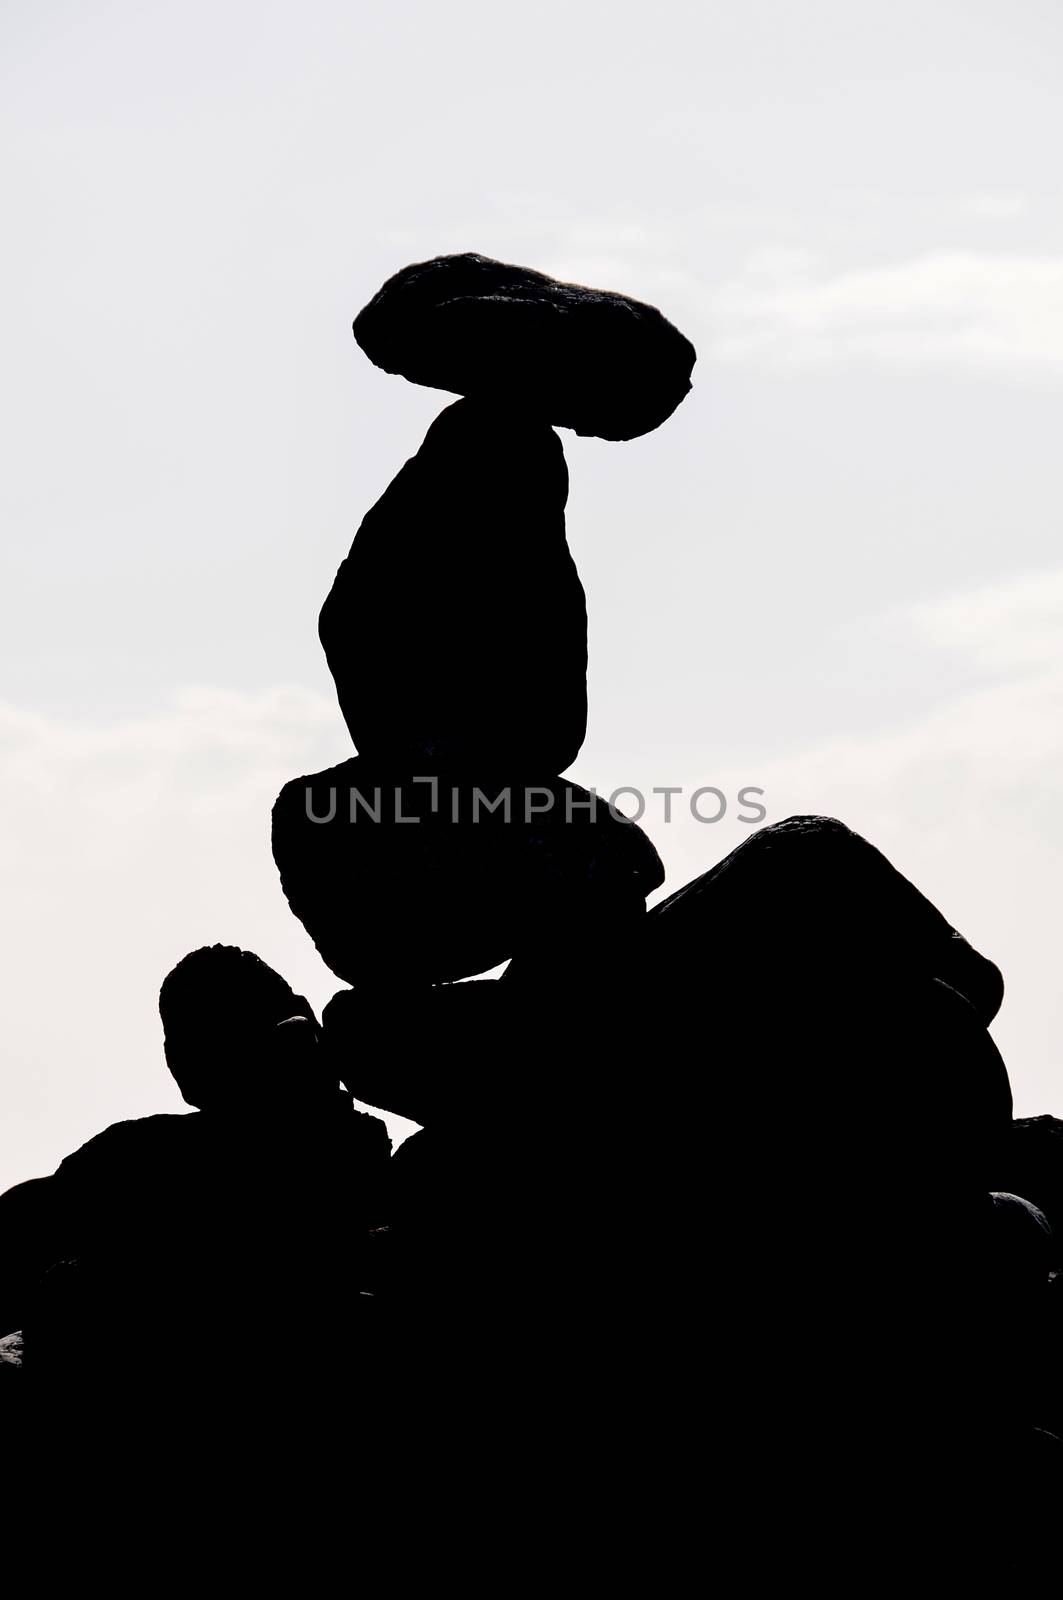 The Buddhist Traditional Stone Pyramids Silhouette by underworld